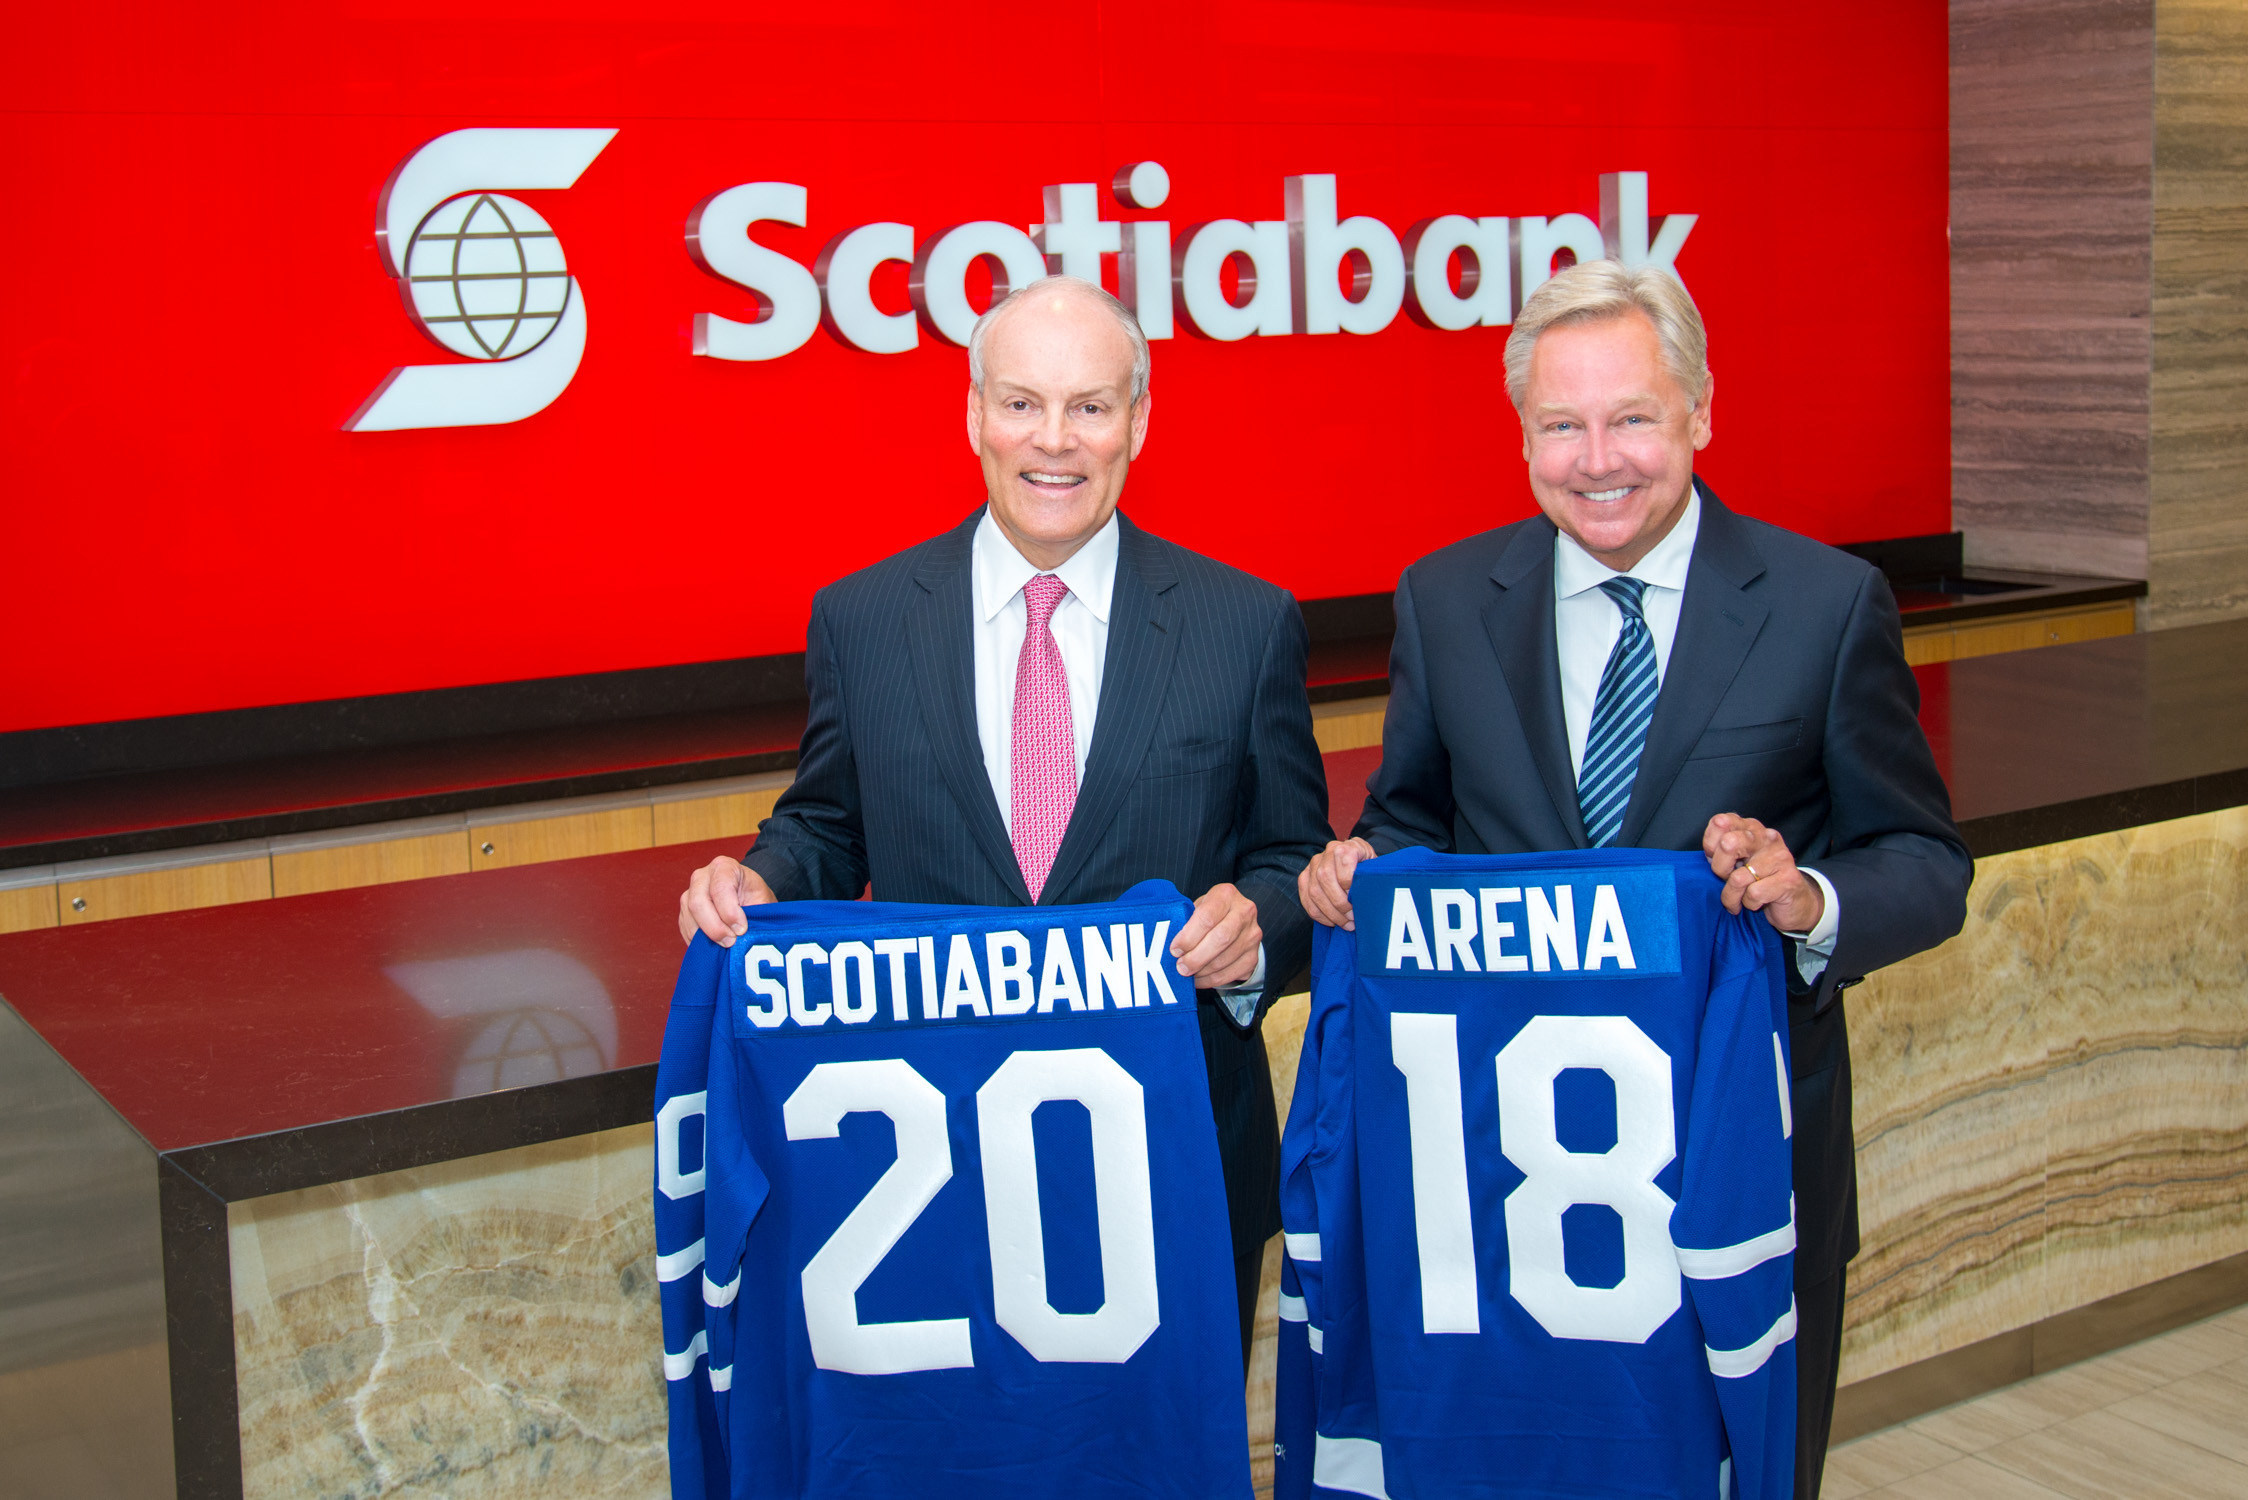 Scotiabank-Home of the Maple Leafs and Raptors to become Scotiab